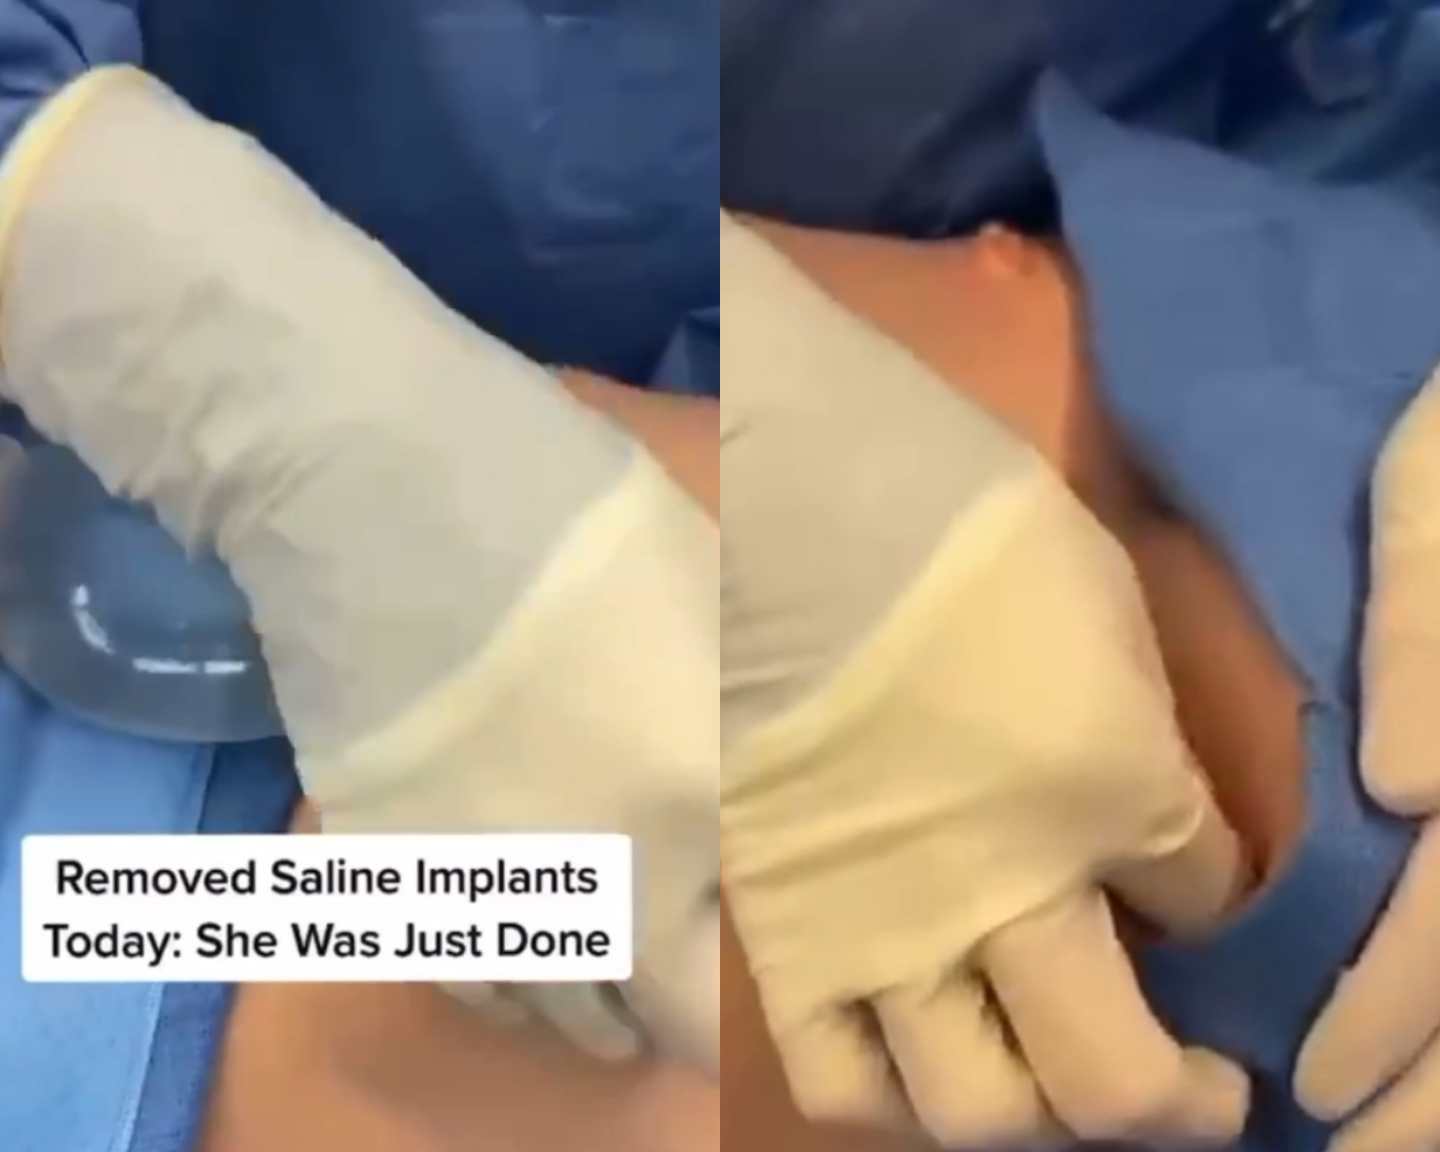 Removal of 2 Breast Implants Using Saline Solution